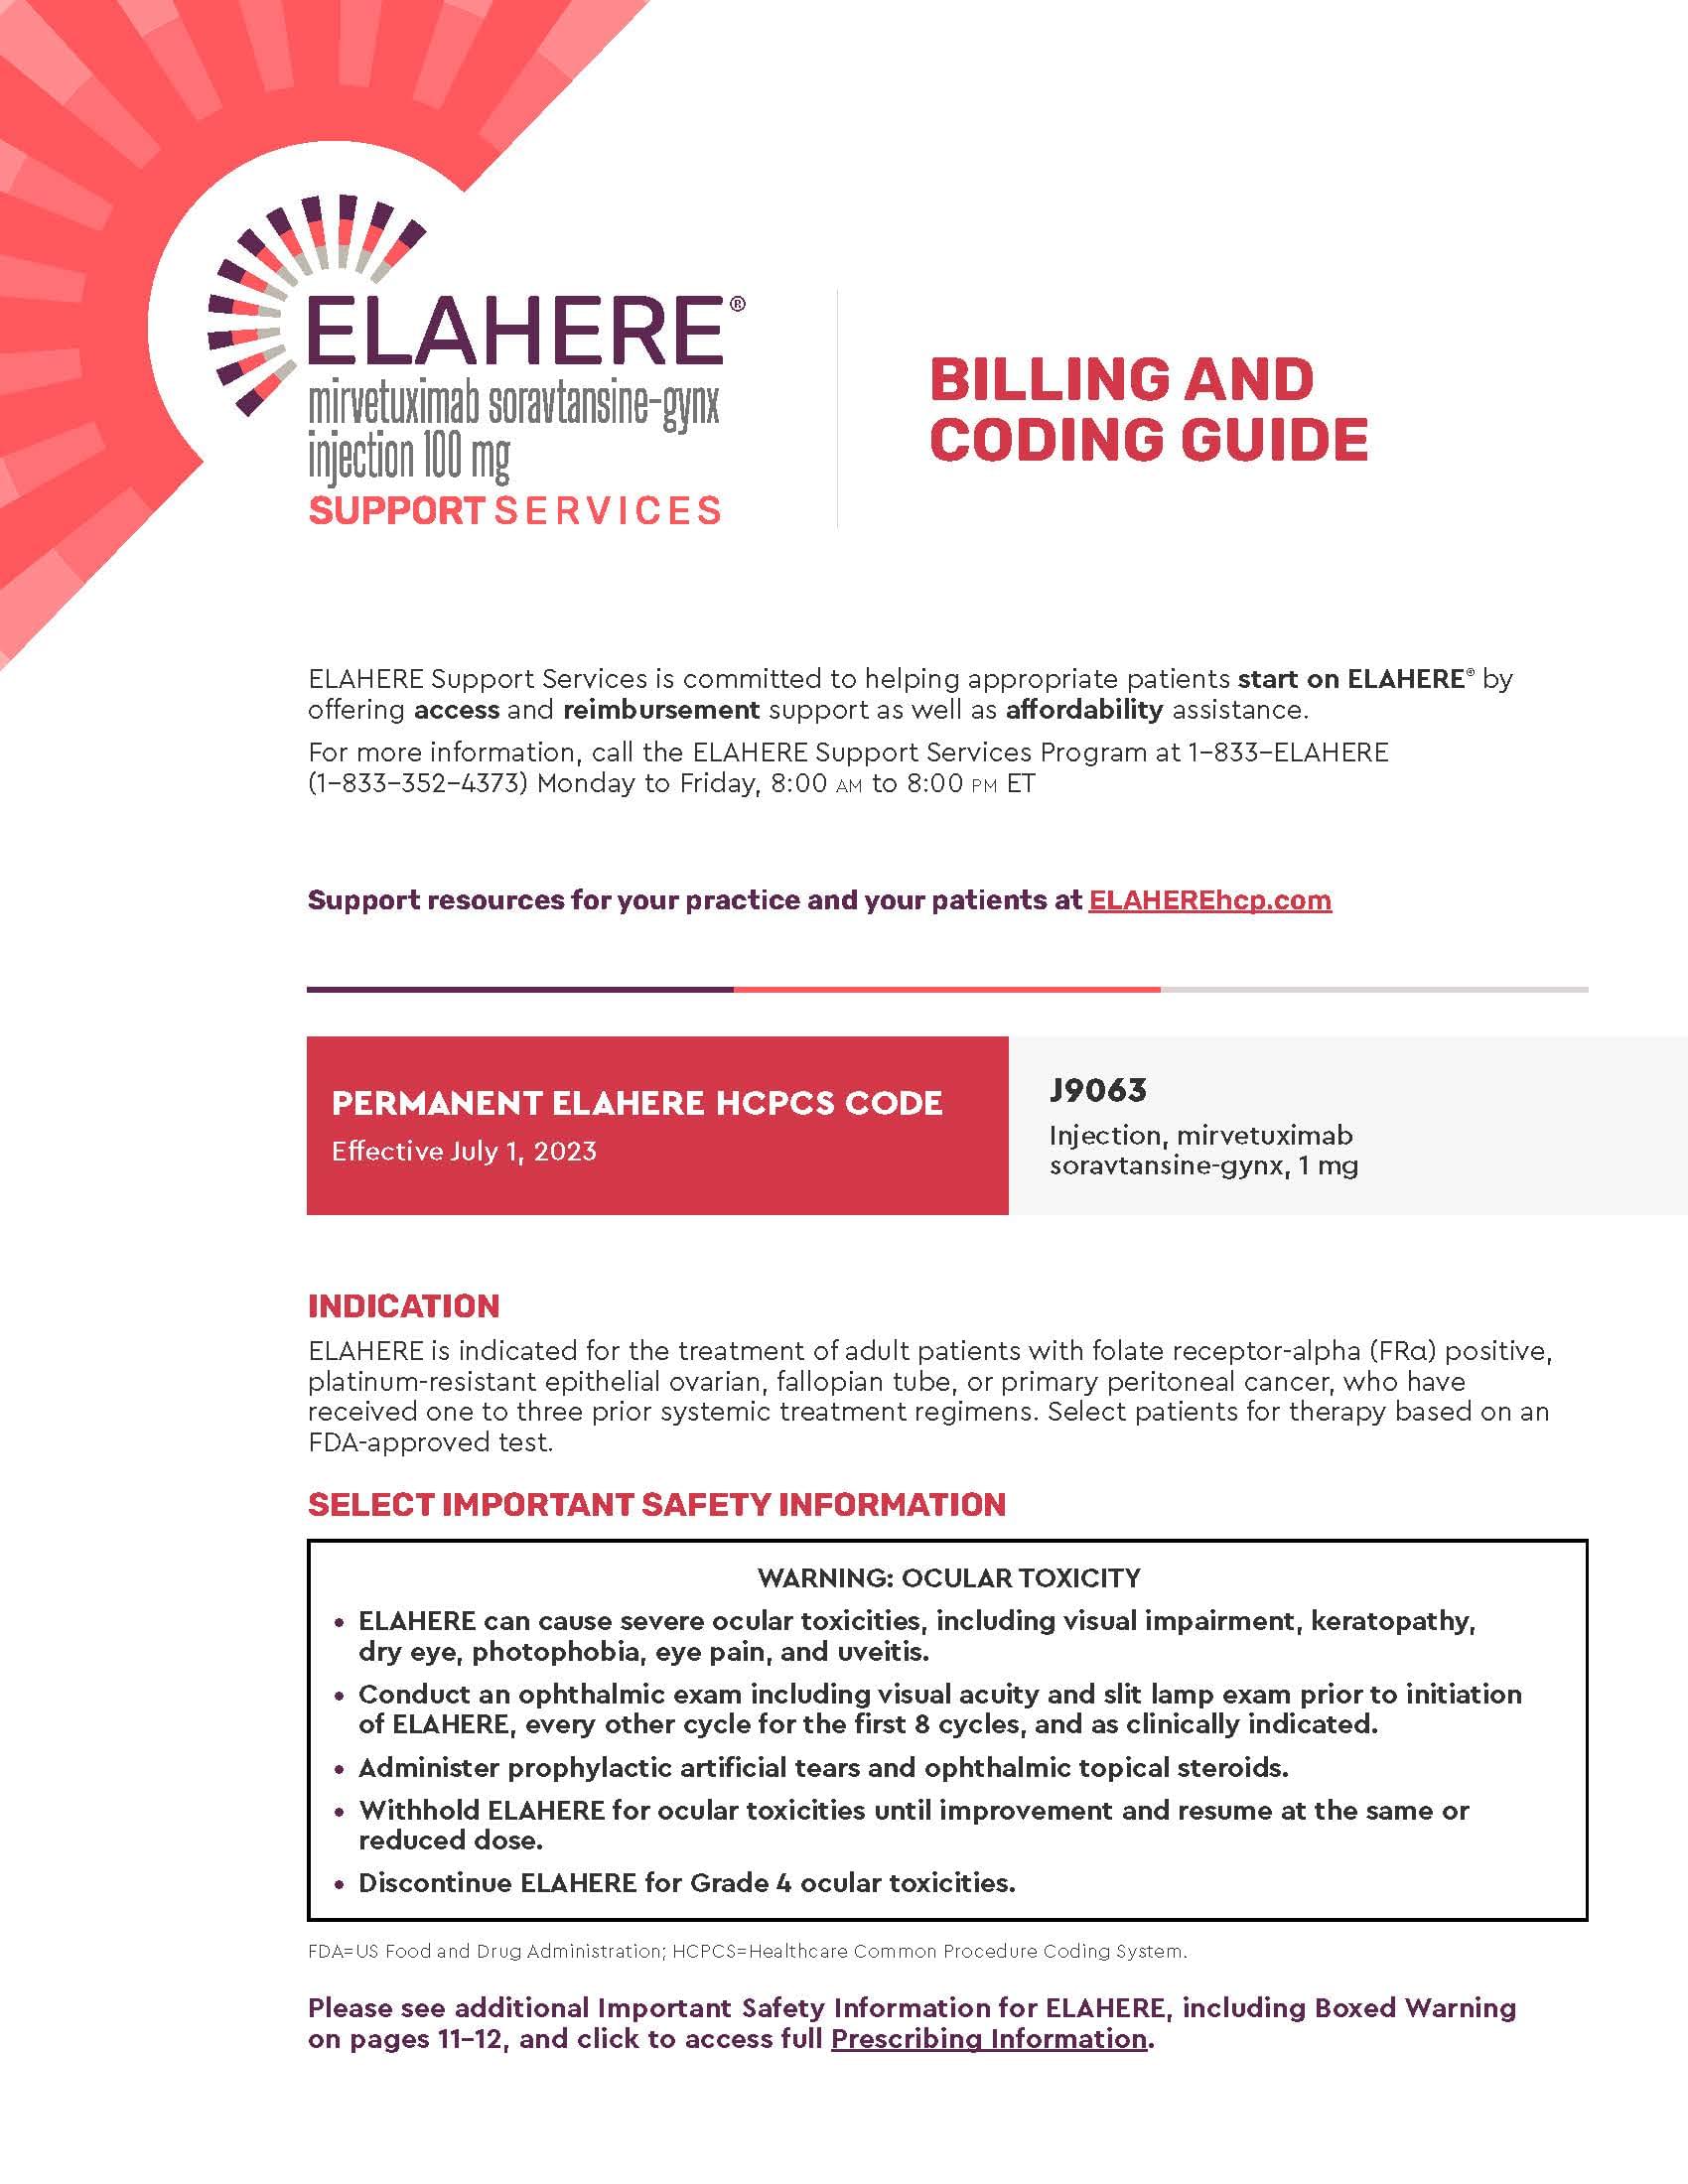 ELAHERE Billing and Coding Guide